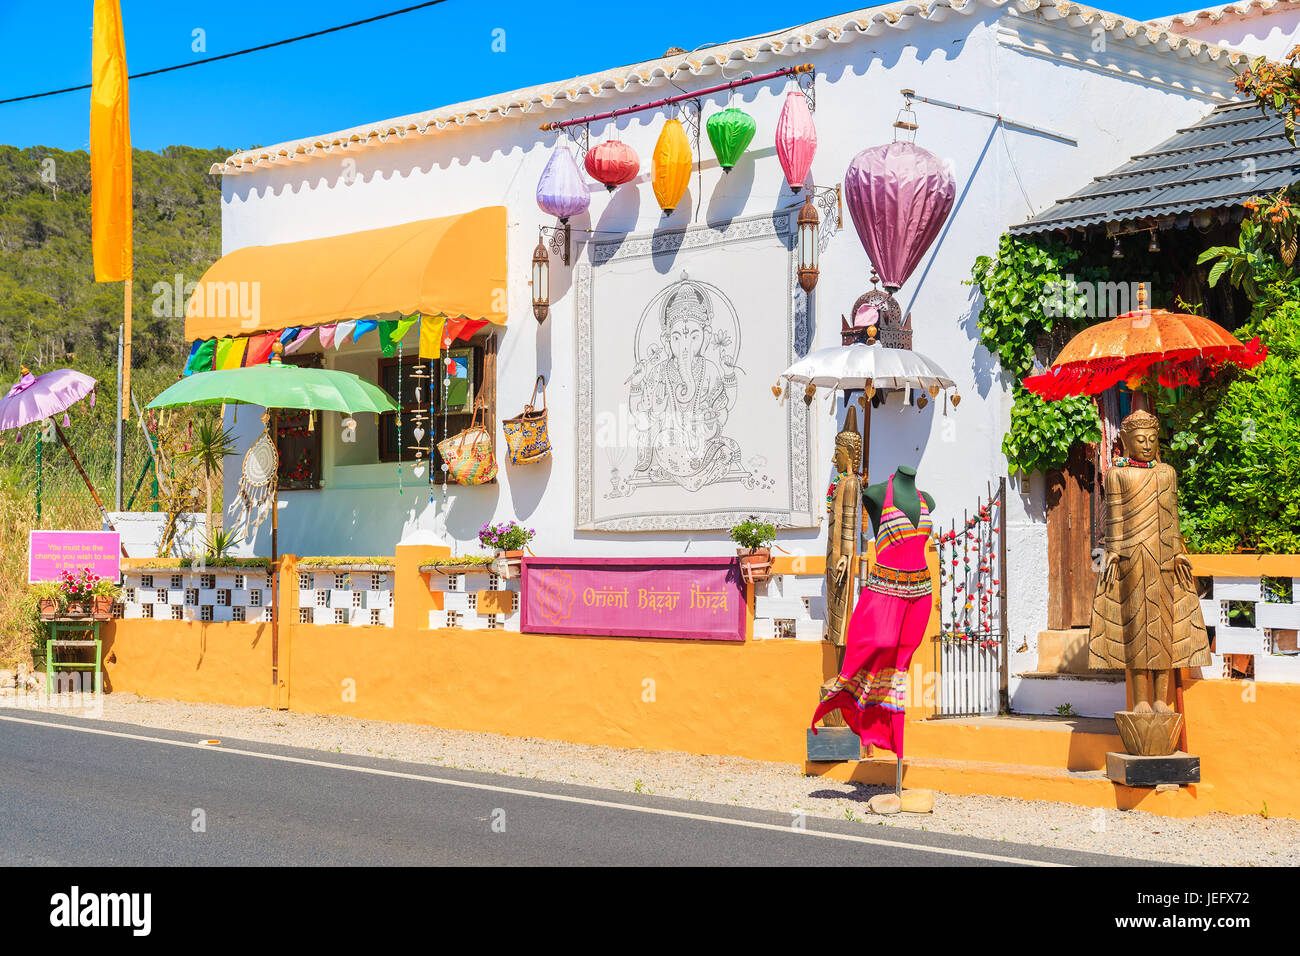 IBIZA ISLAND, SPAIN - MAY 20, 2017: Indian shop with clothes on street of Sant Carles de Peralta village on Ibiza island, Spain. Stock Photo